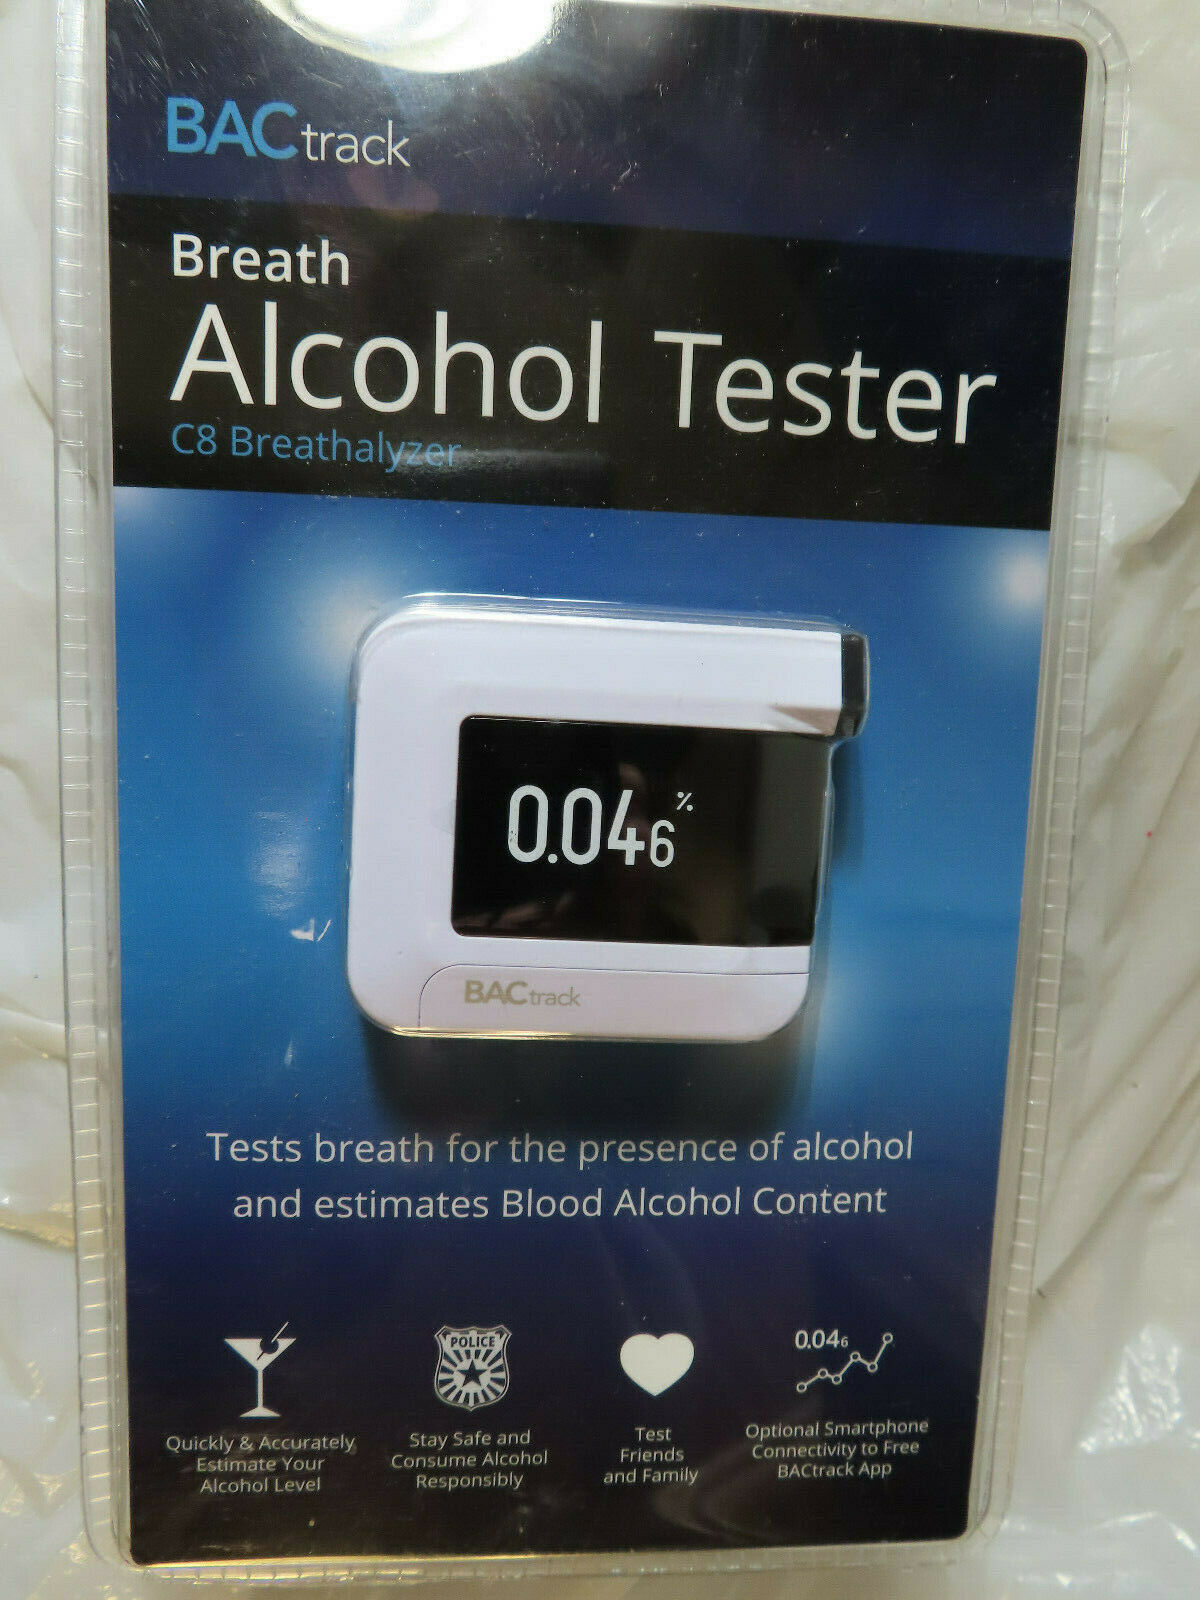 Bactrack Breath Alcohol Tester C8 Breathalyzer Brand New, Factory Sealed